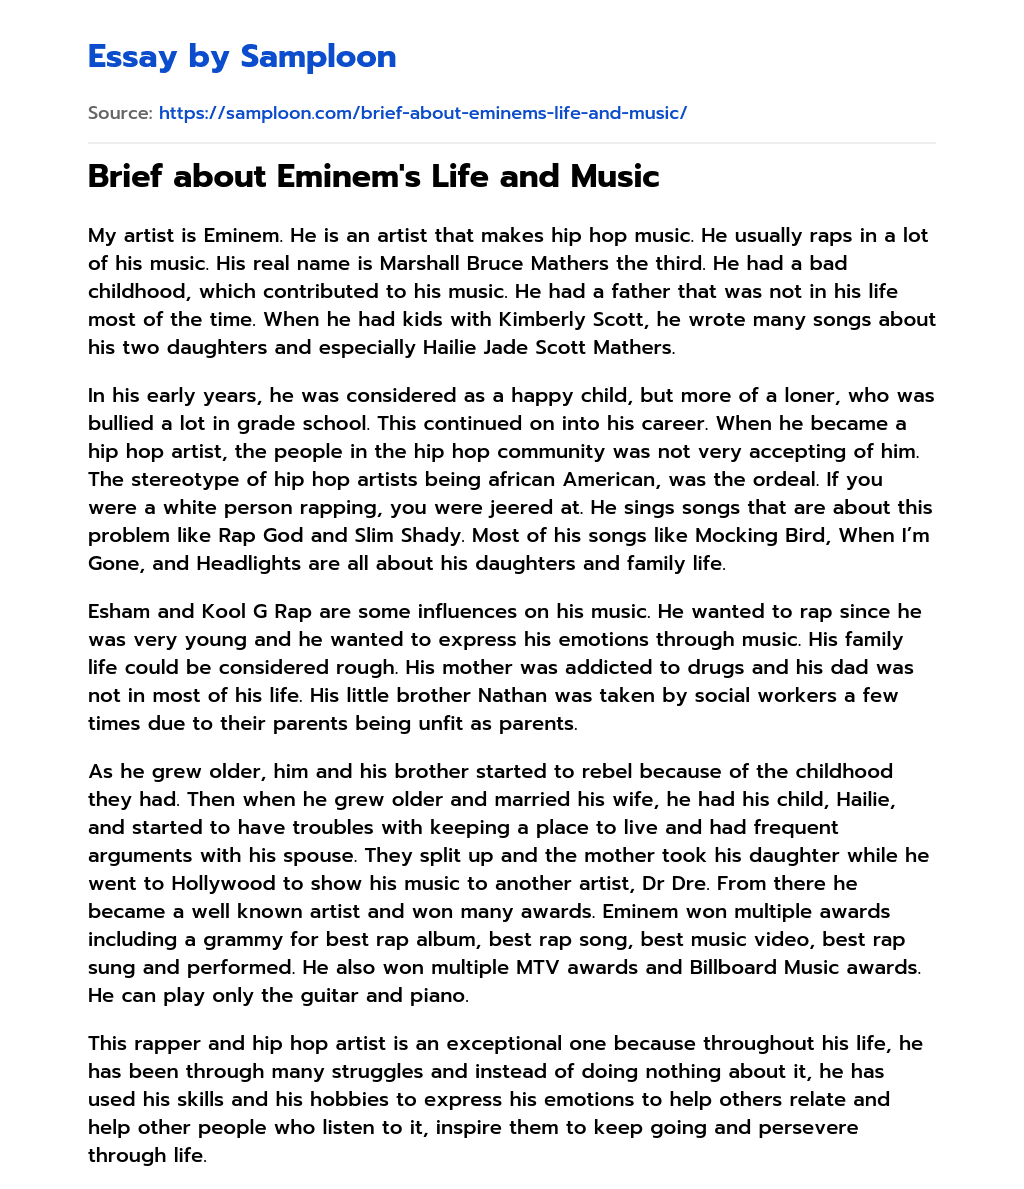 Brief about Eminem’s Life and Music essay